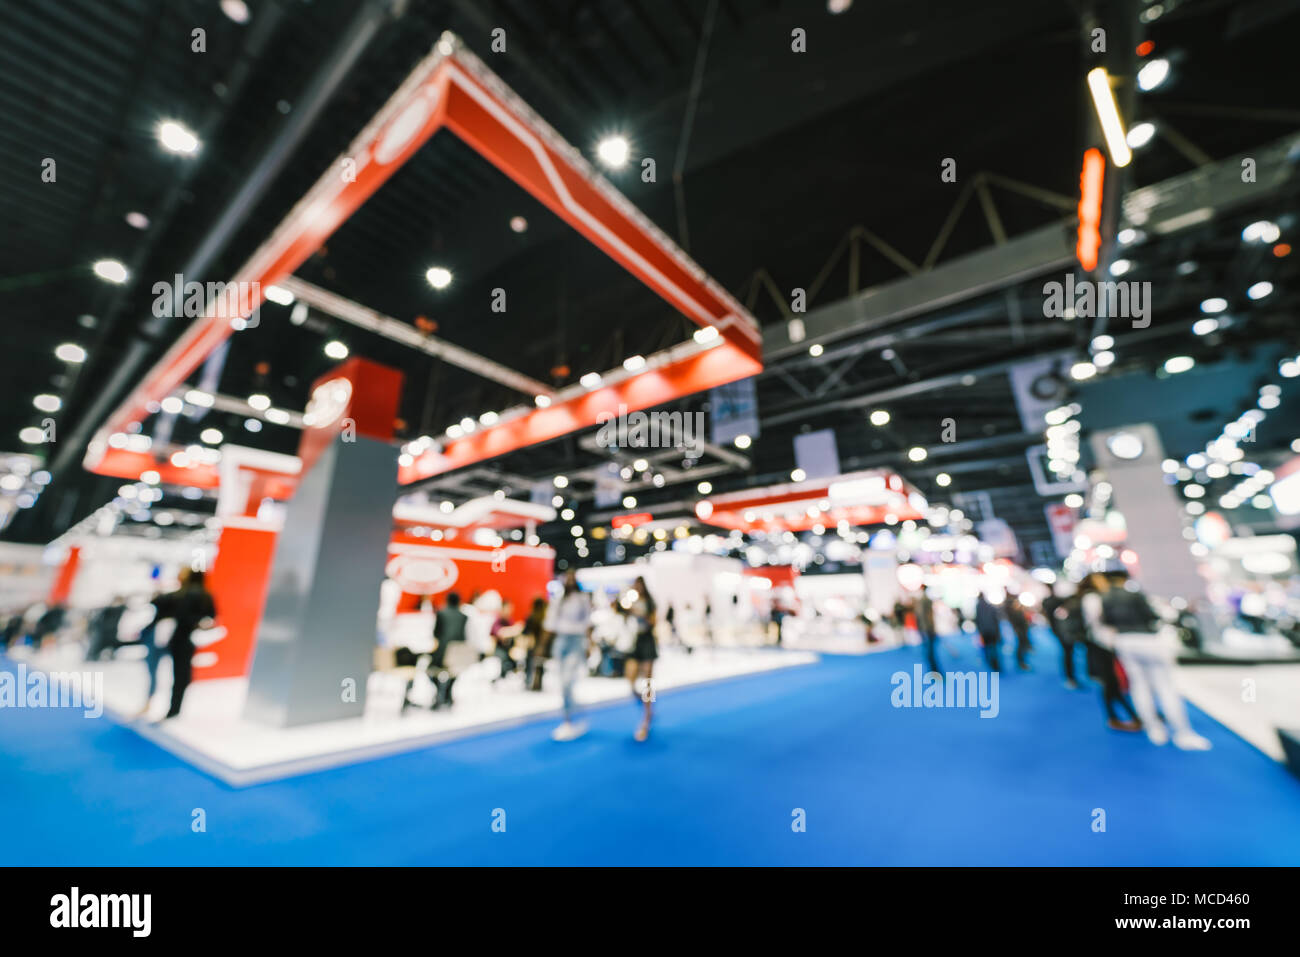 Blur, defocused background of public exhibition hall. Business tradeshow, job fair, or stock market. Organization or company event, commercial trading Stock Photo